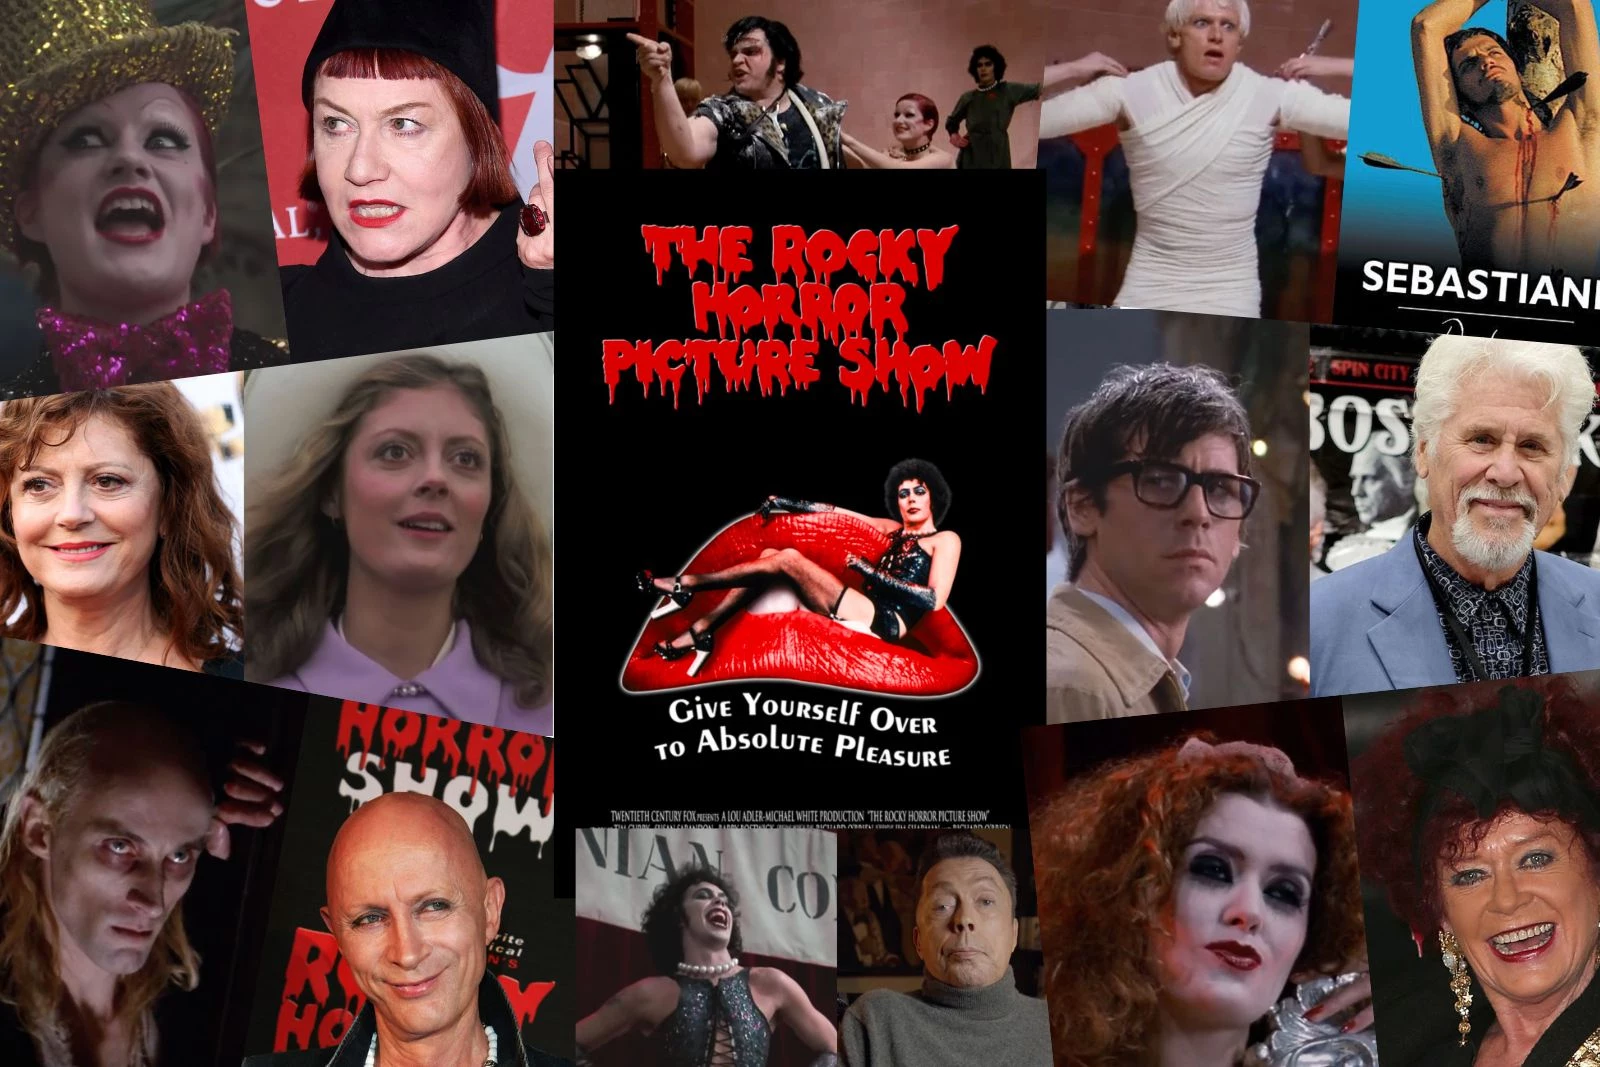 The Rocky Horror Picture Show Cast Where Are They Now?